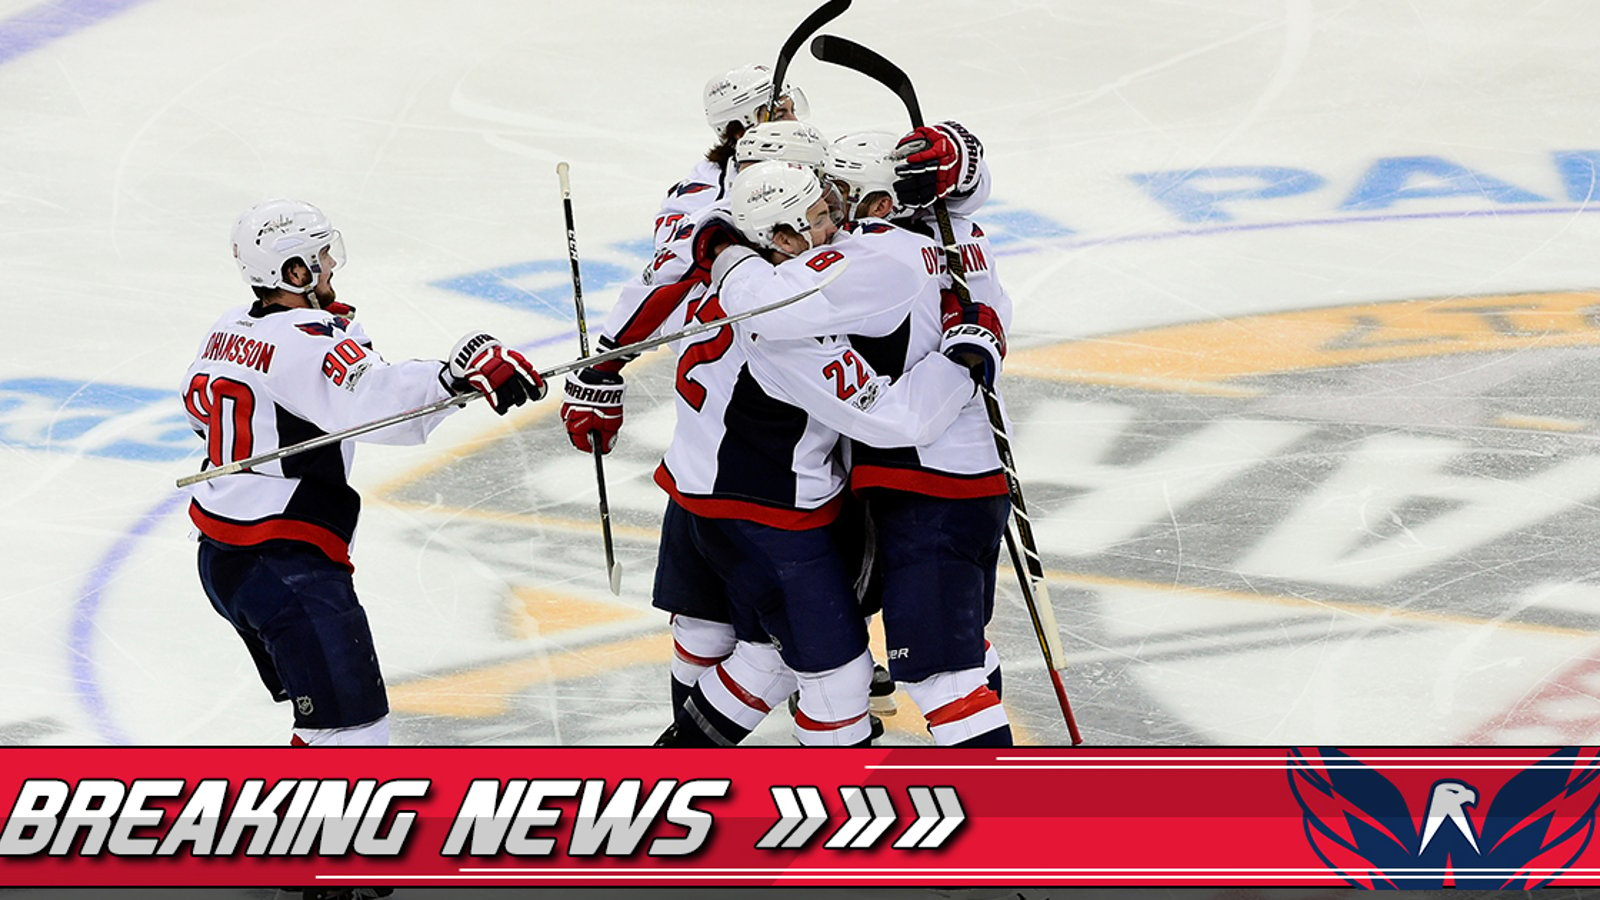 GAMEDAY REPORT: Caps looking to shake things up?